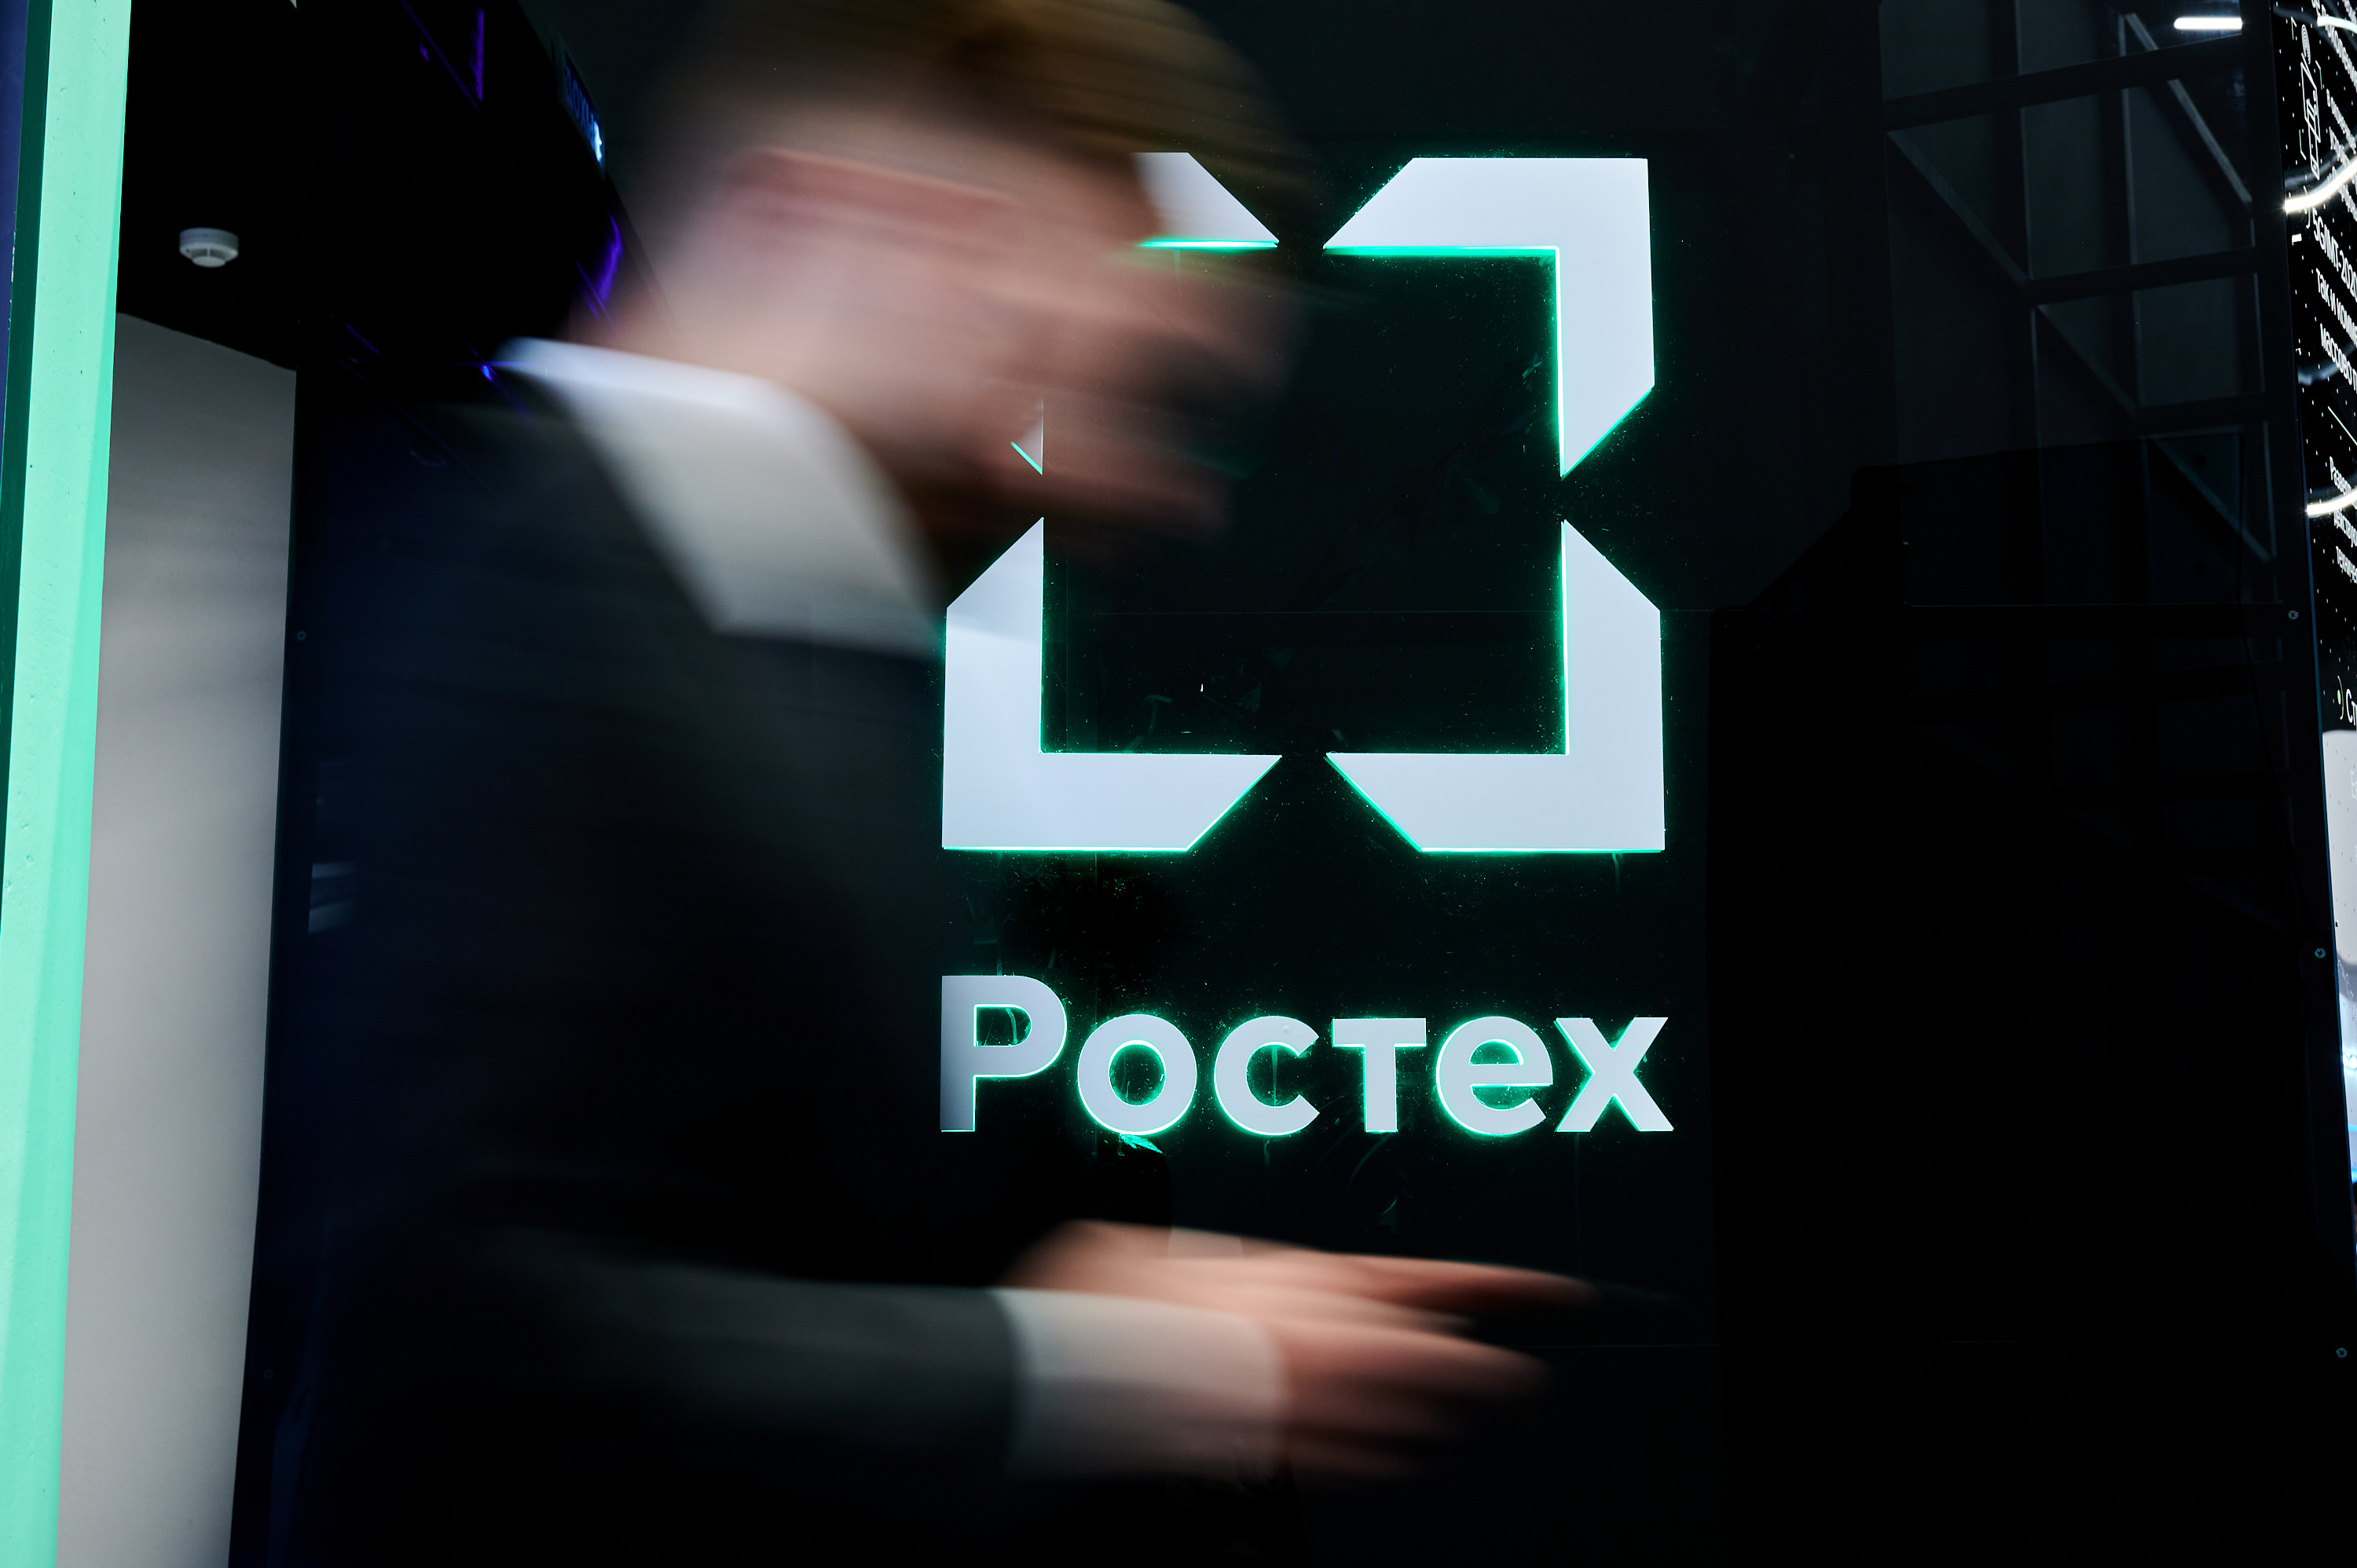 Rostec’s Digital System will be Useful for Unmanned Cargo Delivery Management in Cities